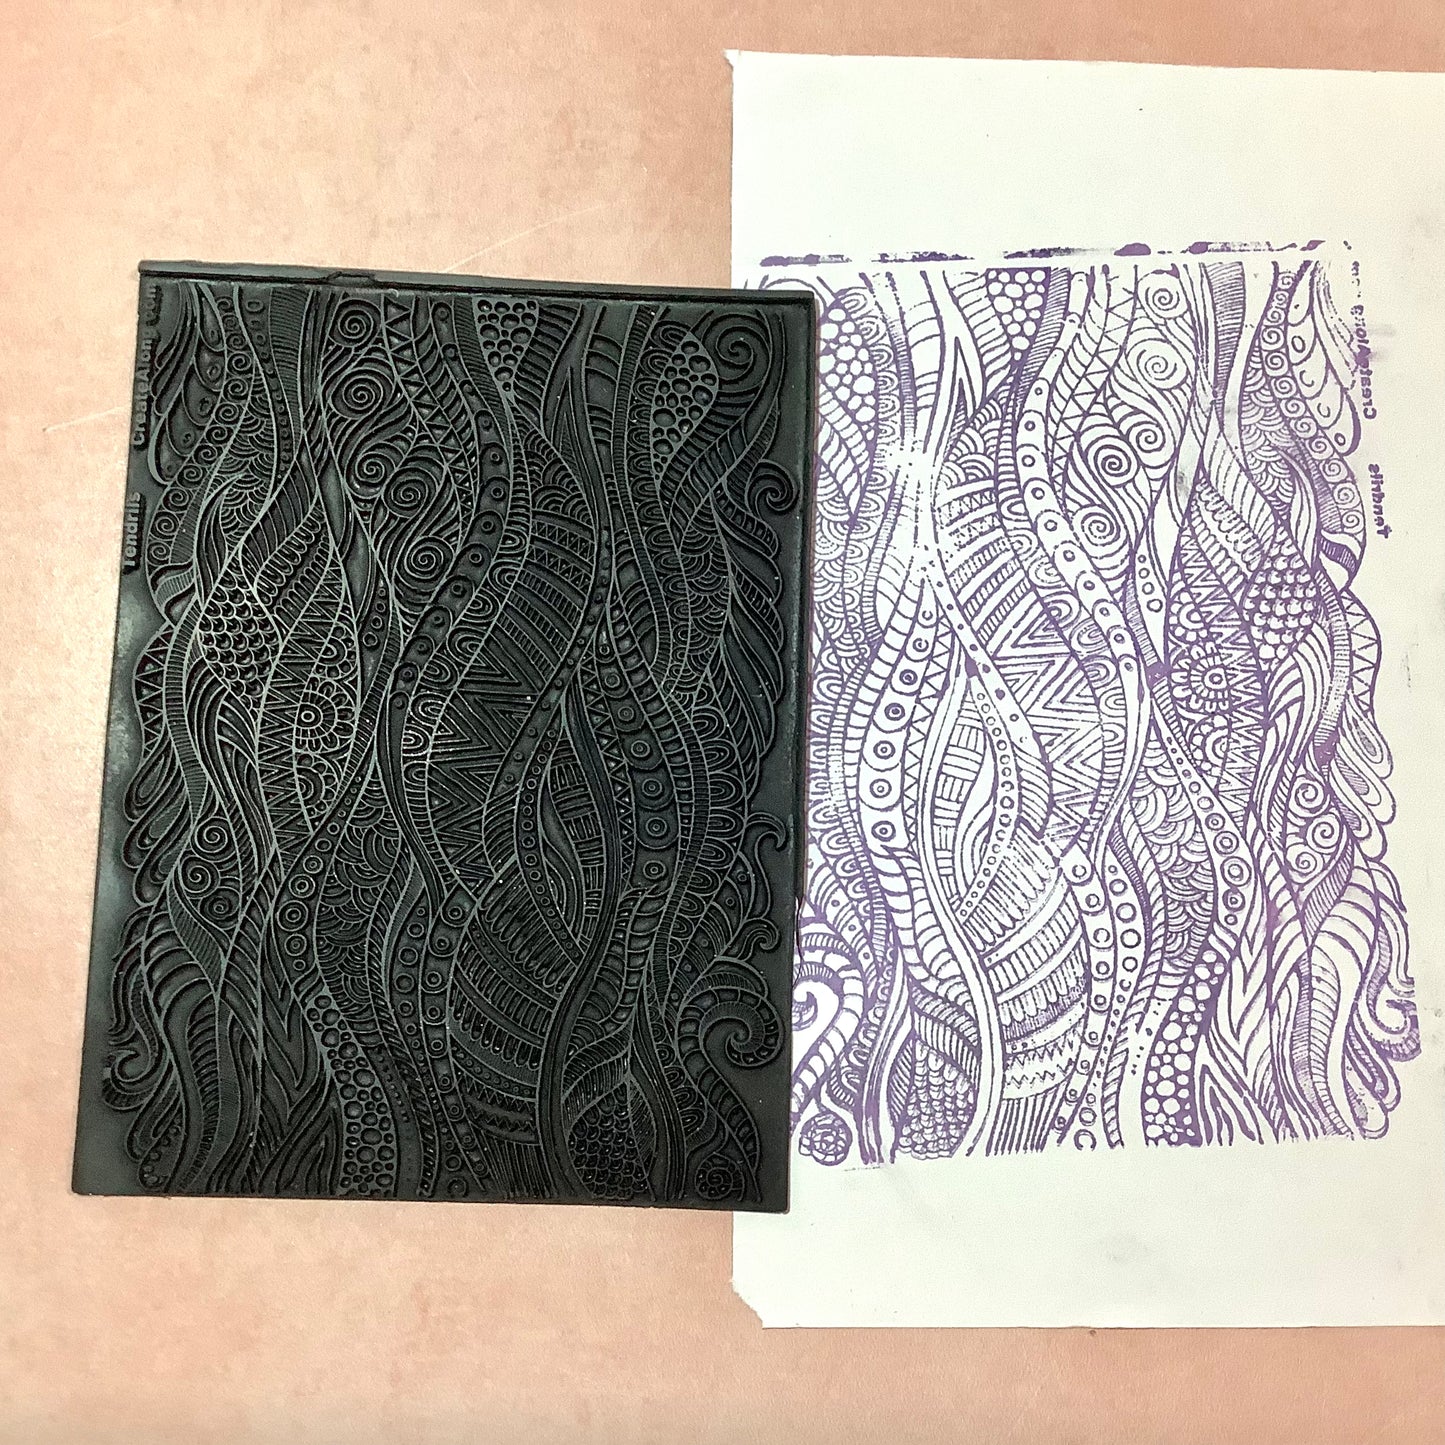 Tendril Tribal Ocean Rubber Stamp Ink medium Texture Sheet for polymer clay gelli plate printing scrapbooking jewelry mixed media